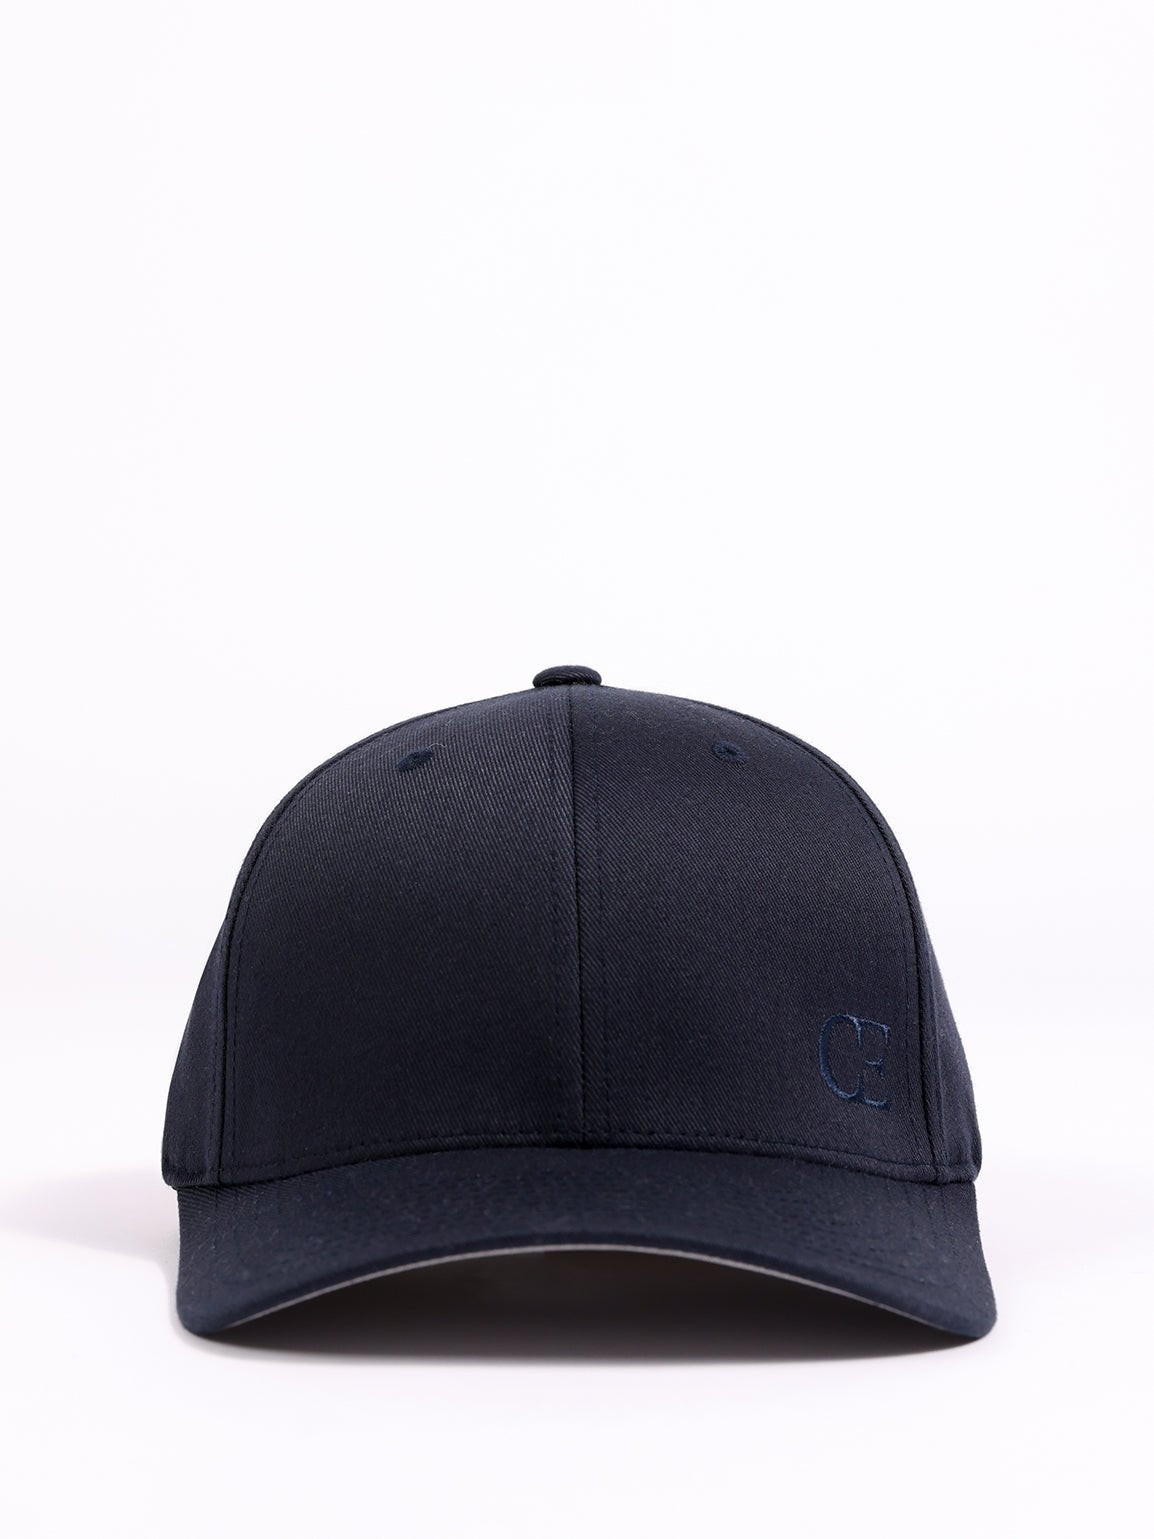 Navy urban classic hat with white background |Color:Dark Navy